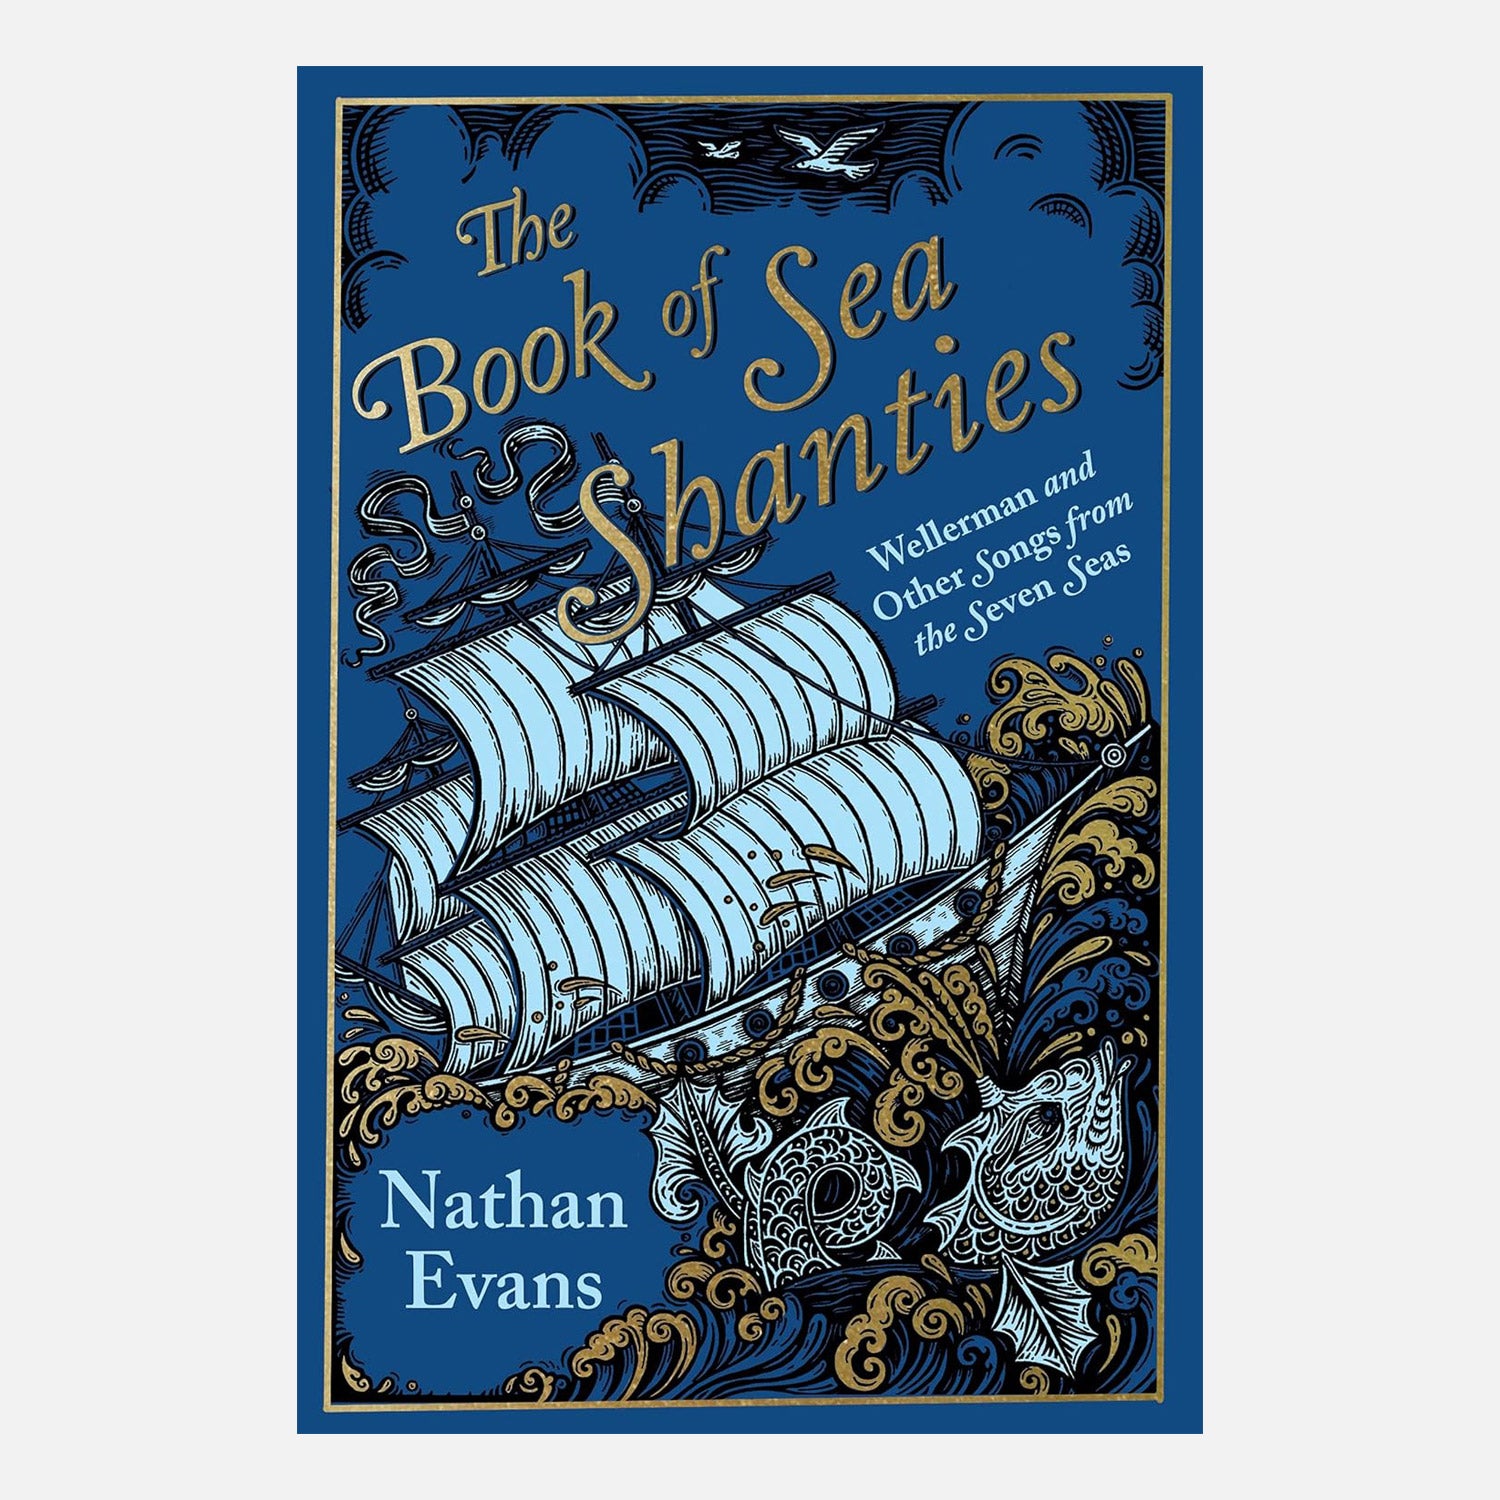 The Book of Sea Shanties: Wellerman and Other Songs from the Seven Seas by Nathan Evans. Navy blue backdrop with pirate ship sailing into gold and white seas with sea monster lurking in the waves.